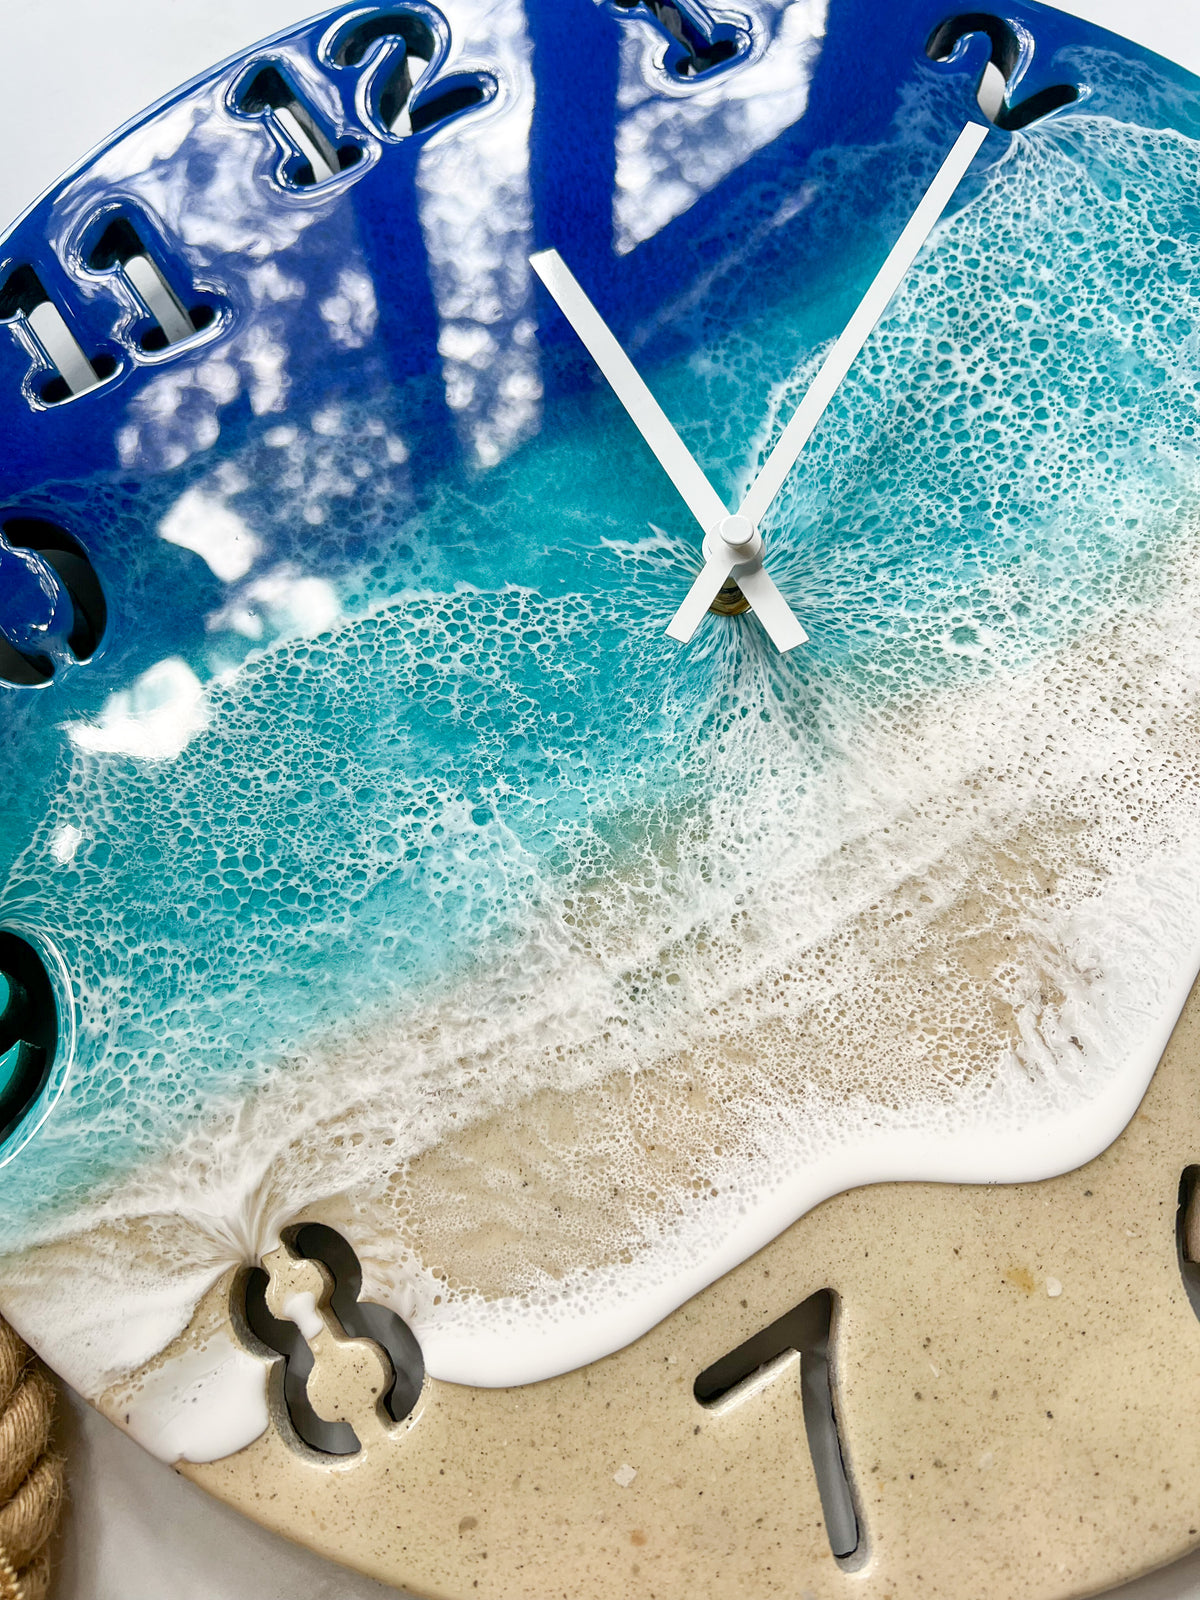 Beach Clocks made with real Florida sand (Varying Sizes & Colors)